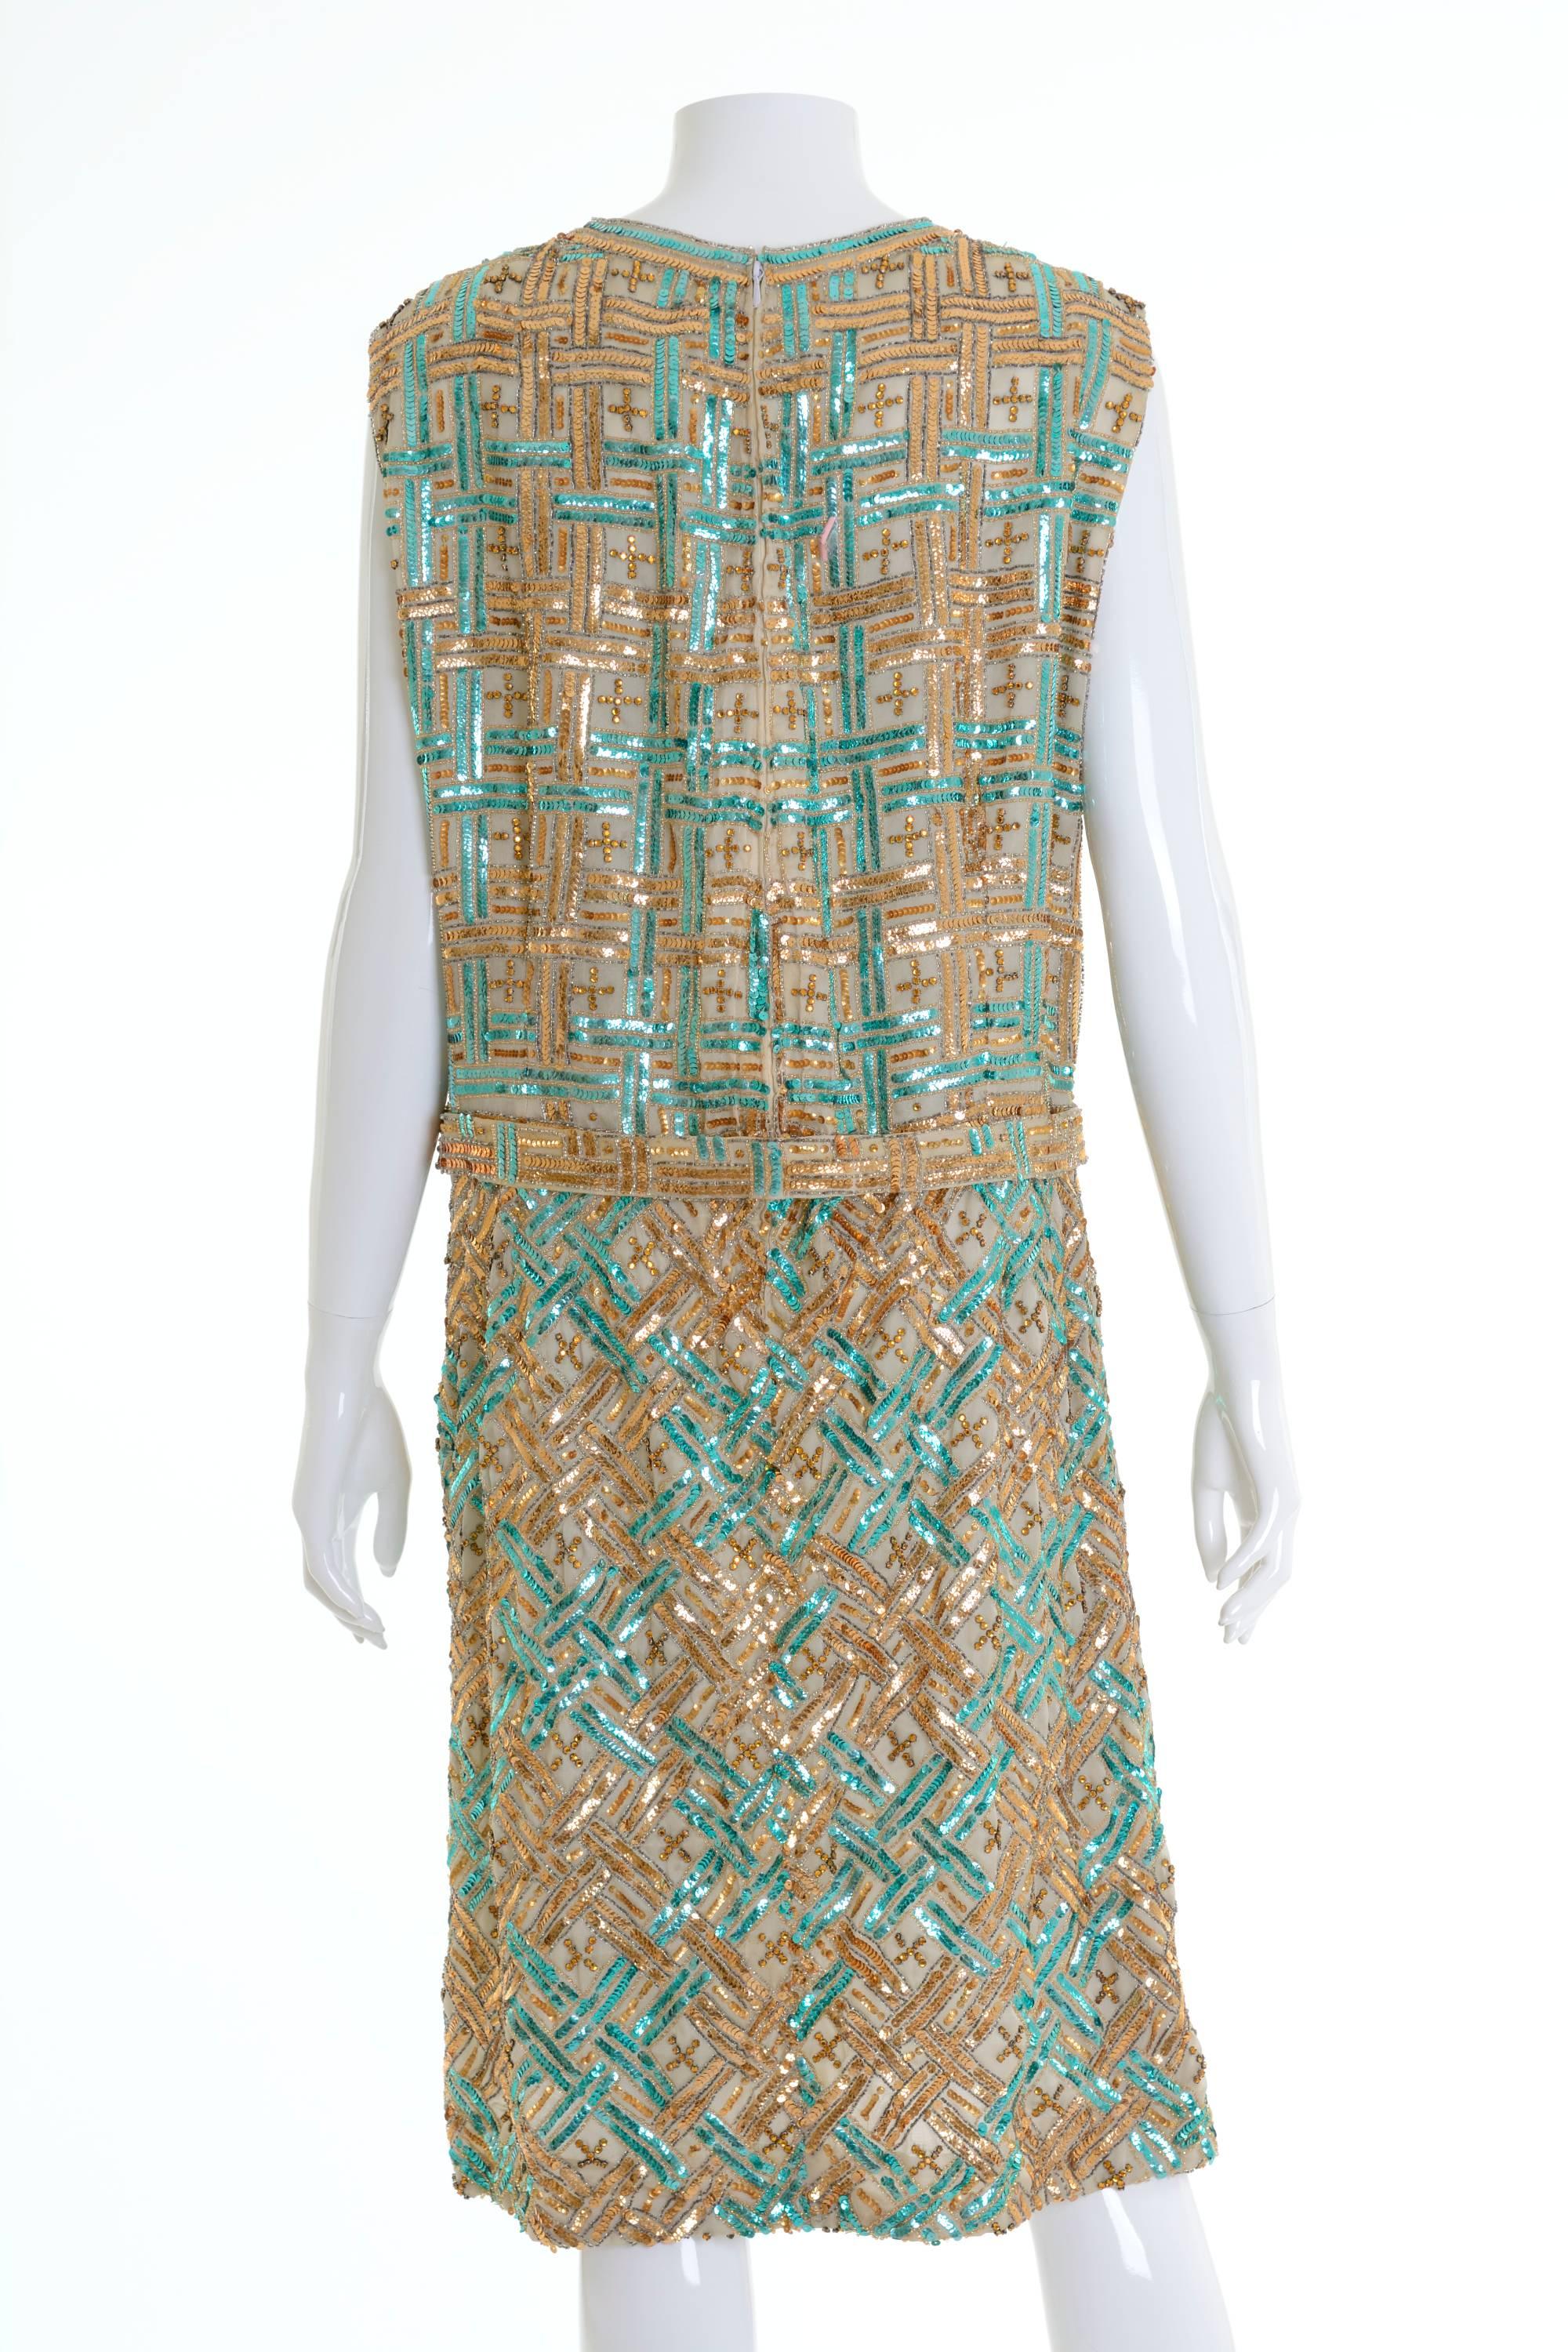 This amazing 1960s mod dress is in a fabulous sequins fabric. It's sleeveless and has back zip closure and is fully lined. 

Good vintage condition

Label: N/A
Fabric: Silk/sequins
Color: cream/golden/turquoise

Measurement:
Estimated size L
Bust 42